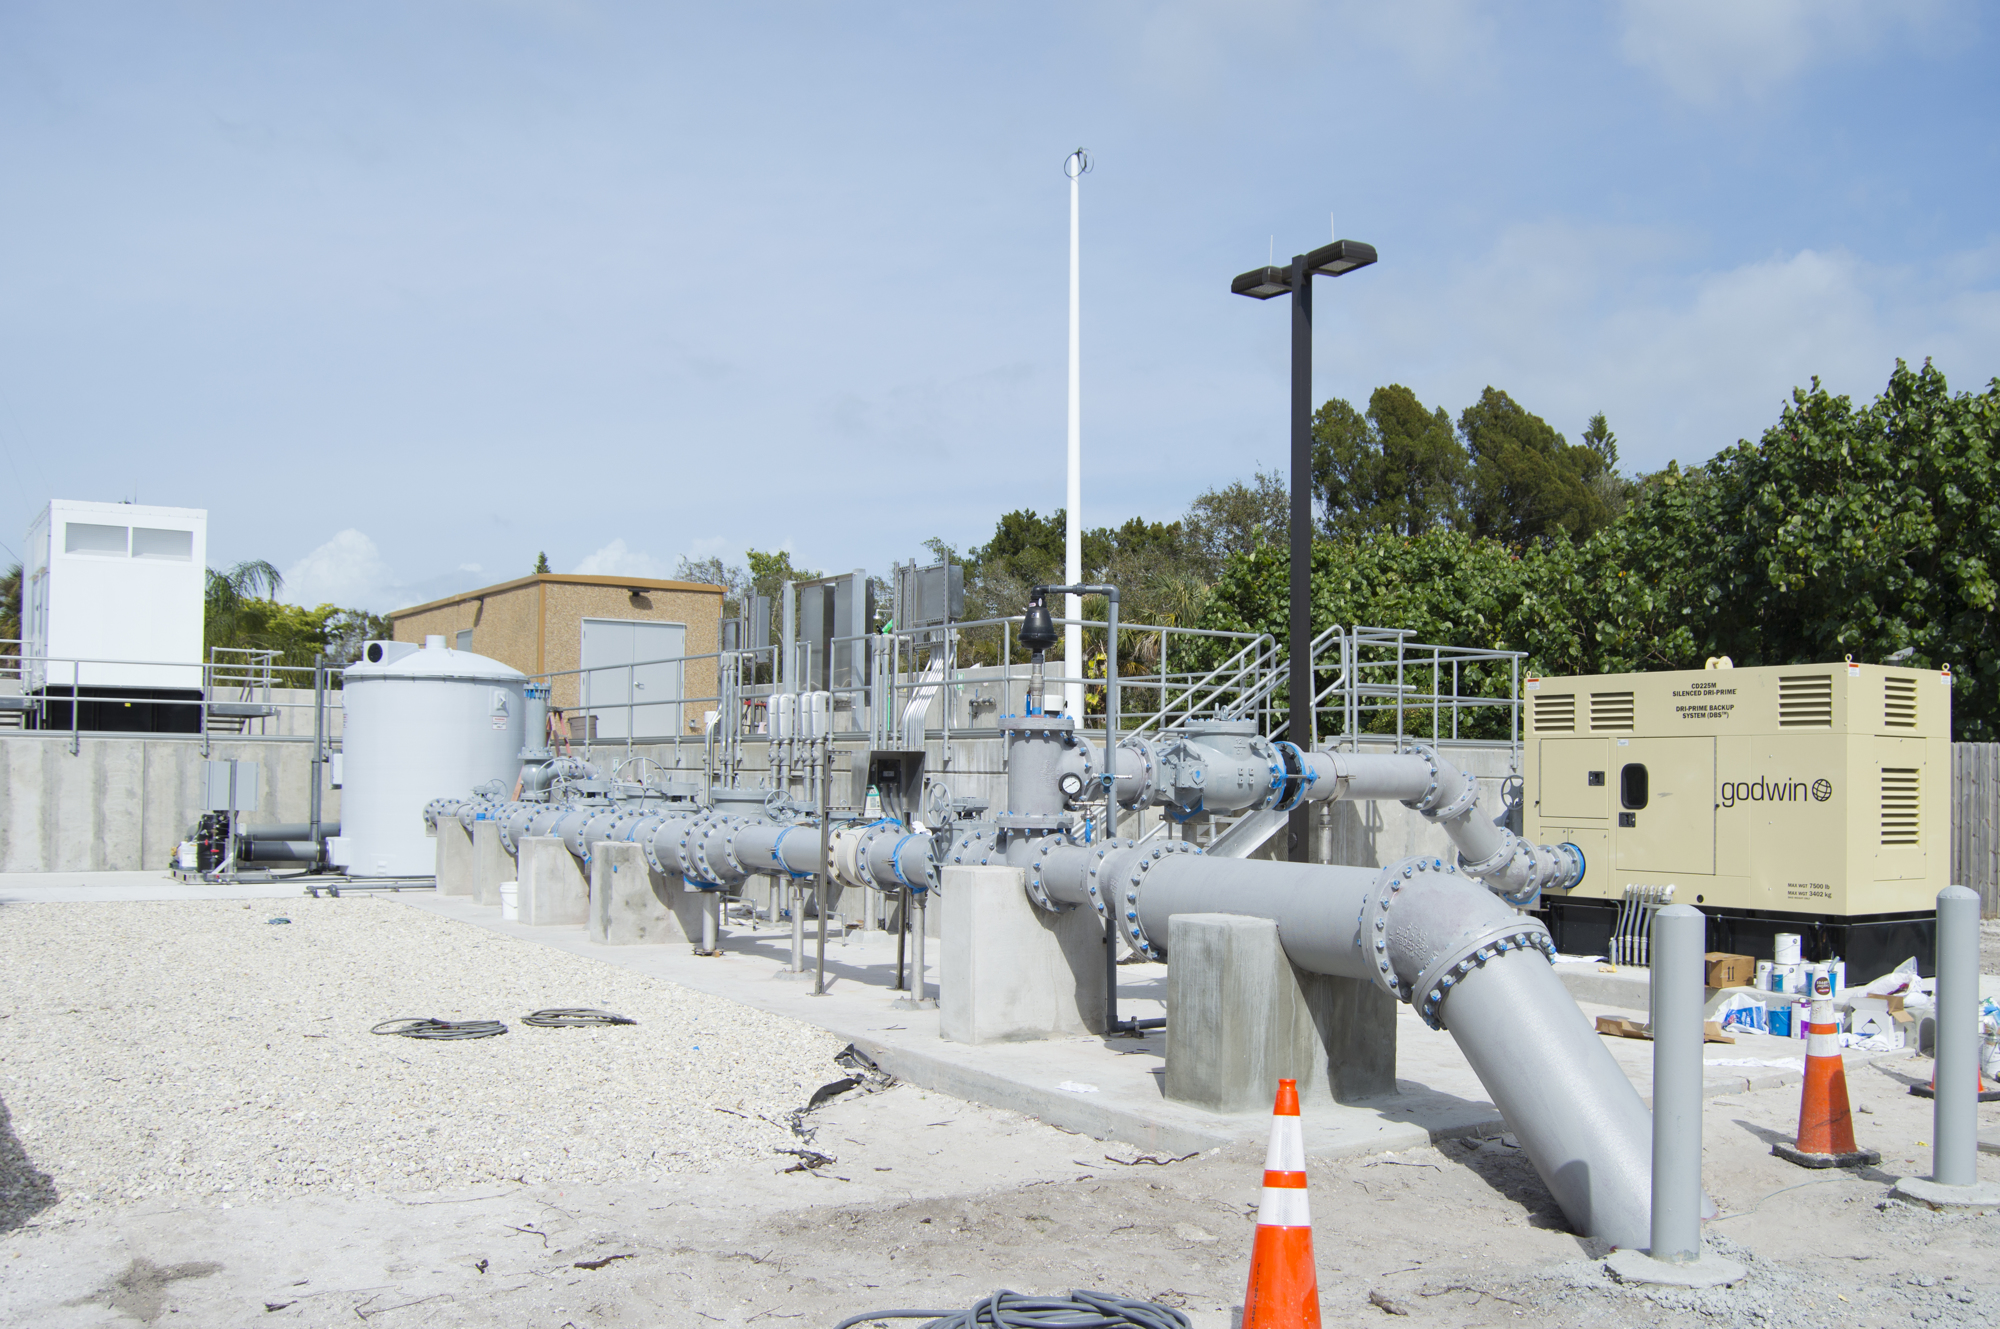 The wastewater treatment facility will be replaced by a pump station, which will transport wastewater to the mainland.